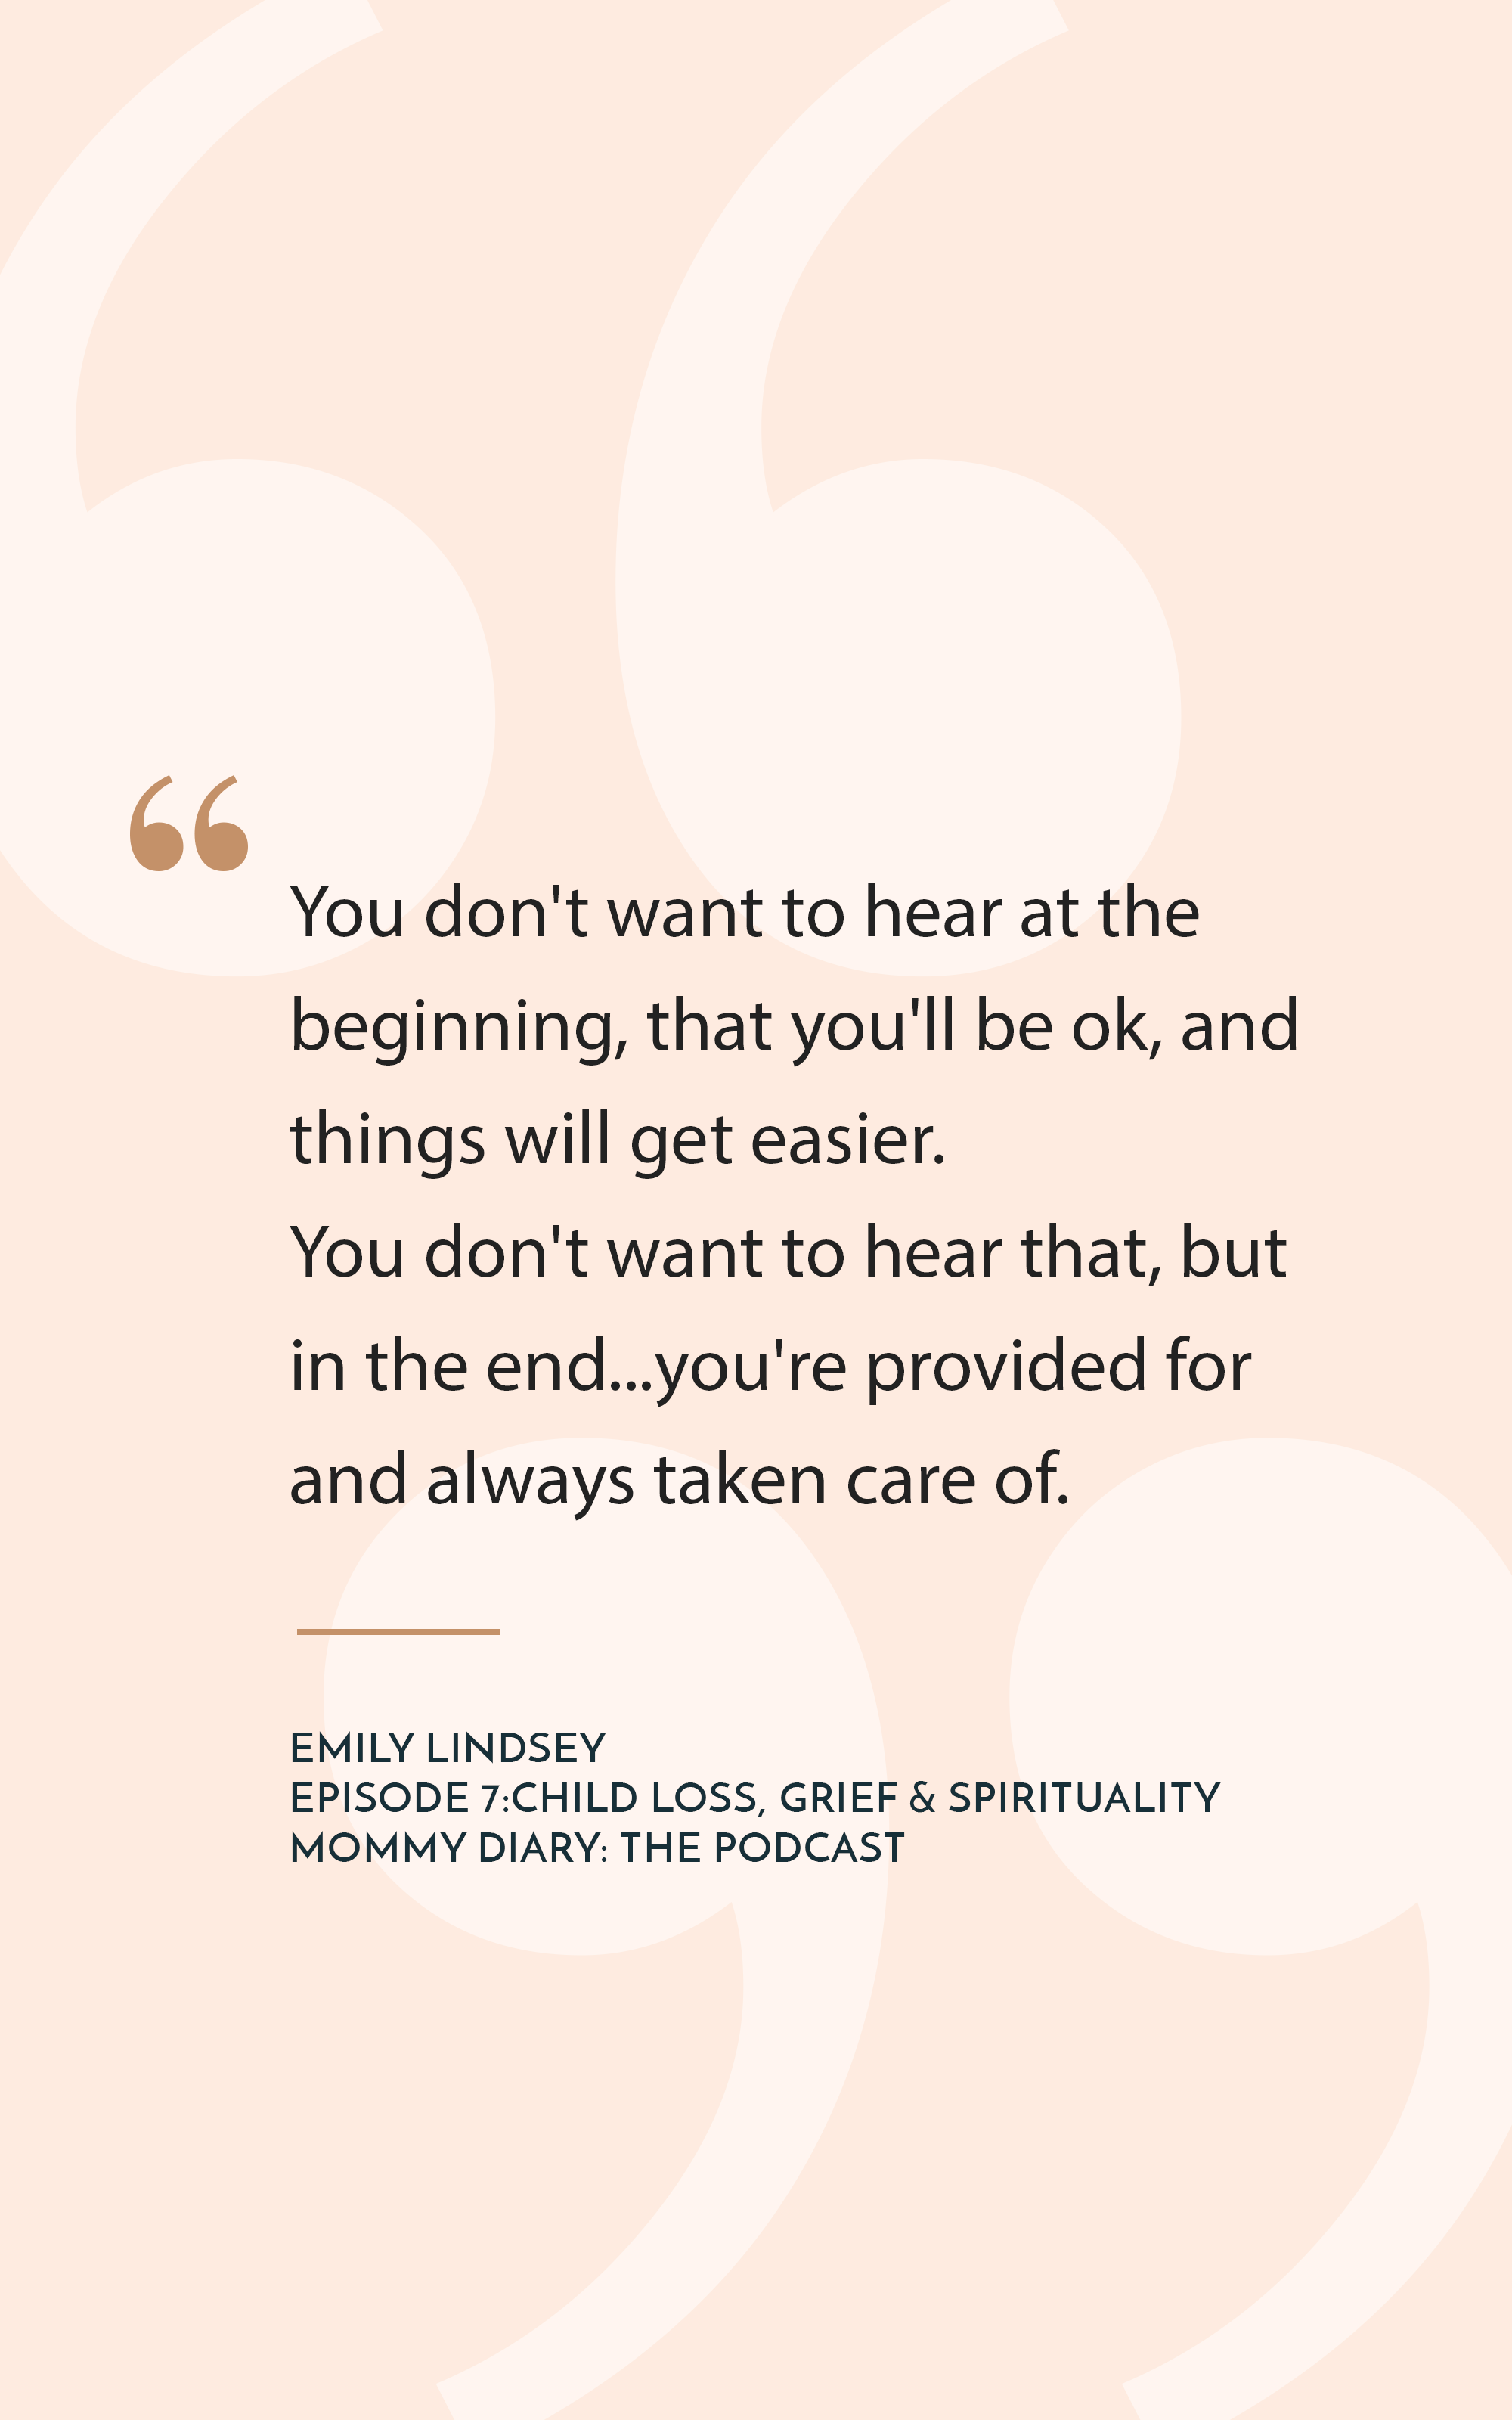 Ep 7: Child Loss, Grief, and Spirituality with Emily Lindsey